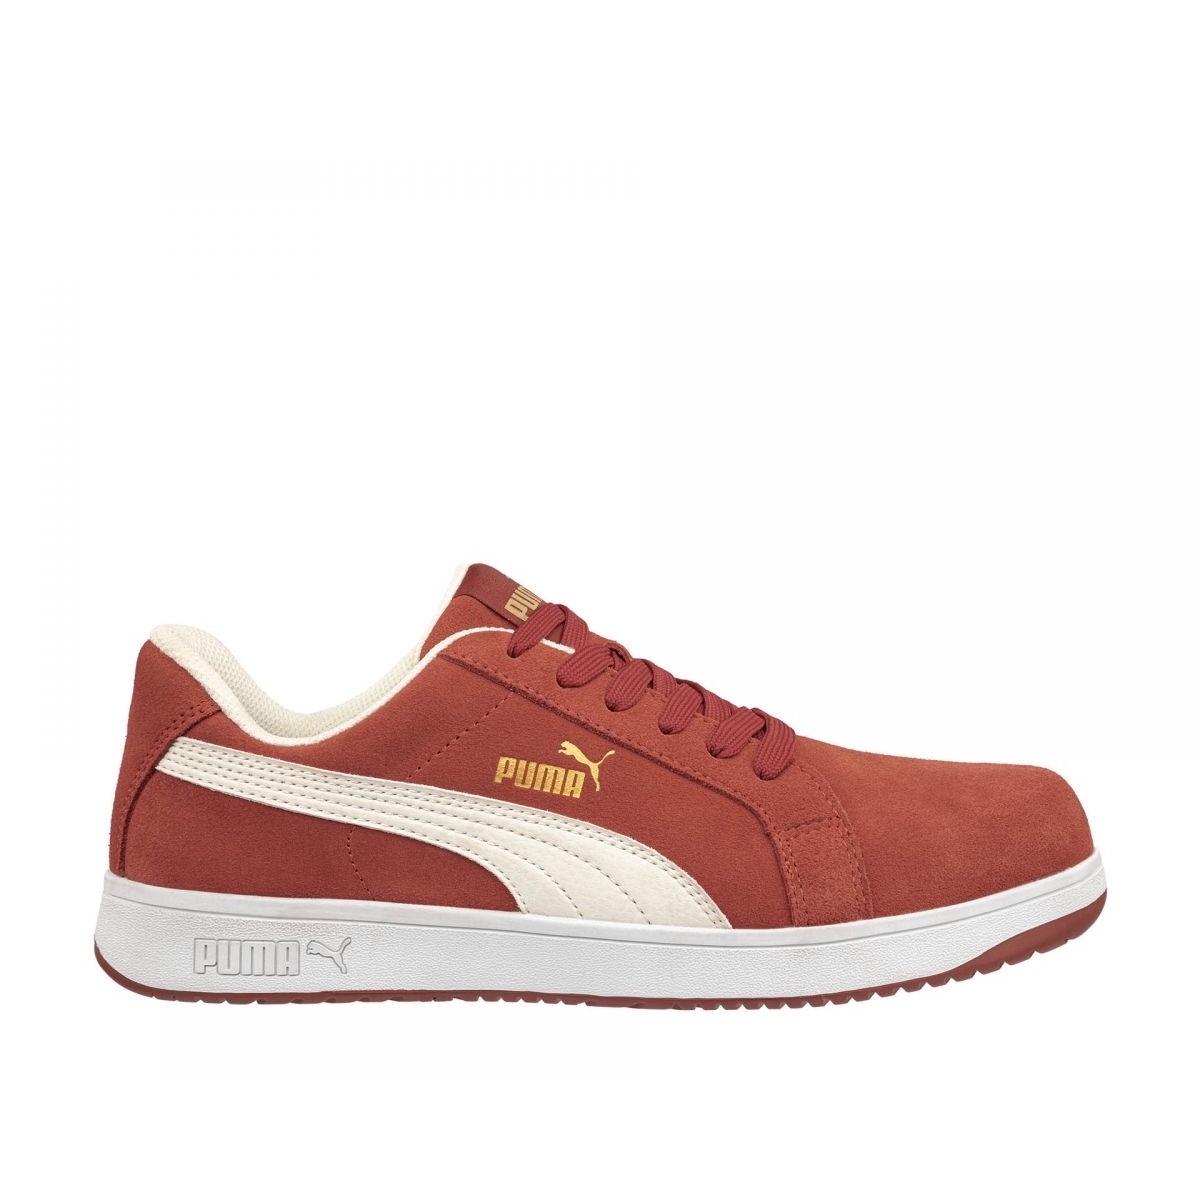 PUMA Safety Men's Iconic Low Composite Toe EH Work Shoes Red Suede - 640045 ONE SIZE RED - RED, 9.5